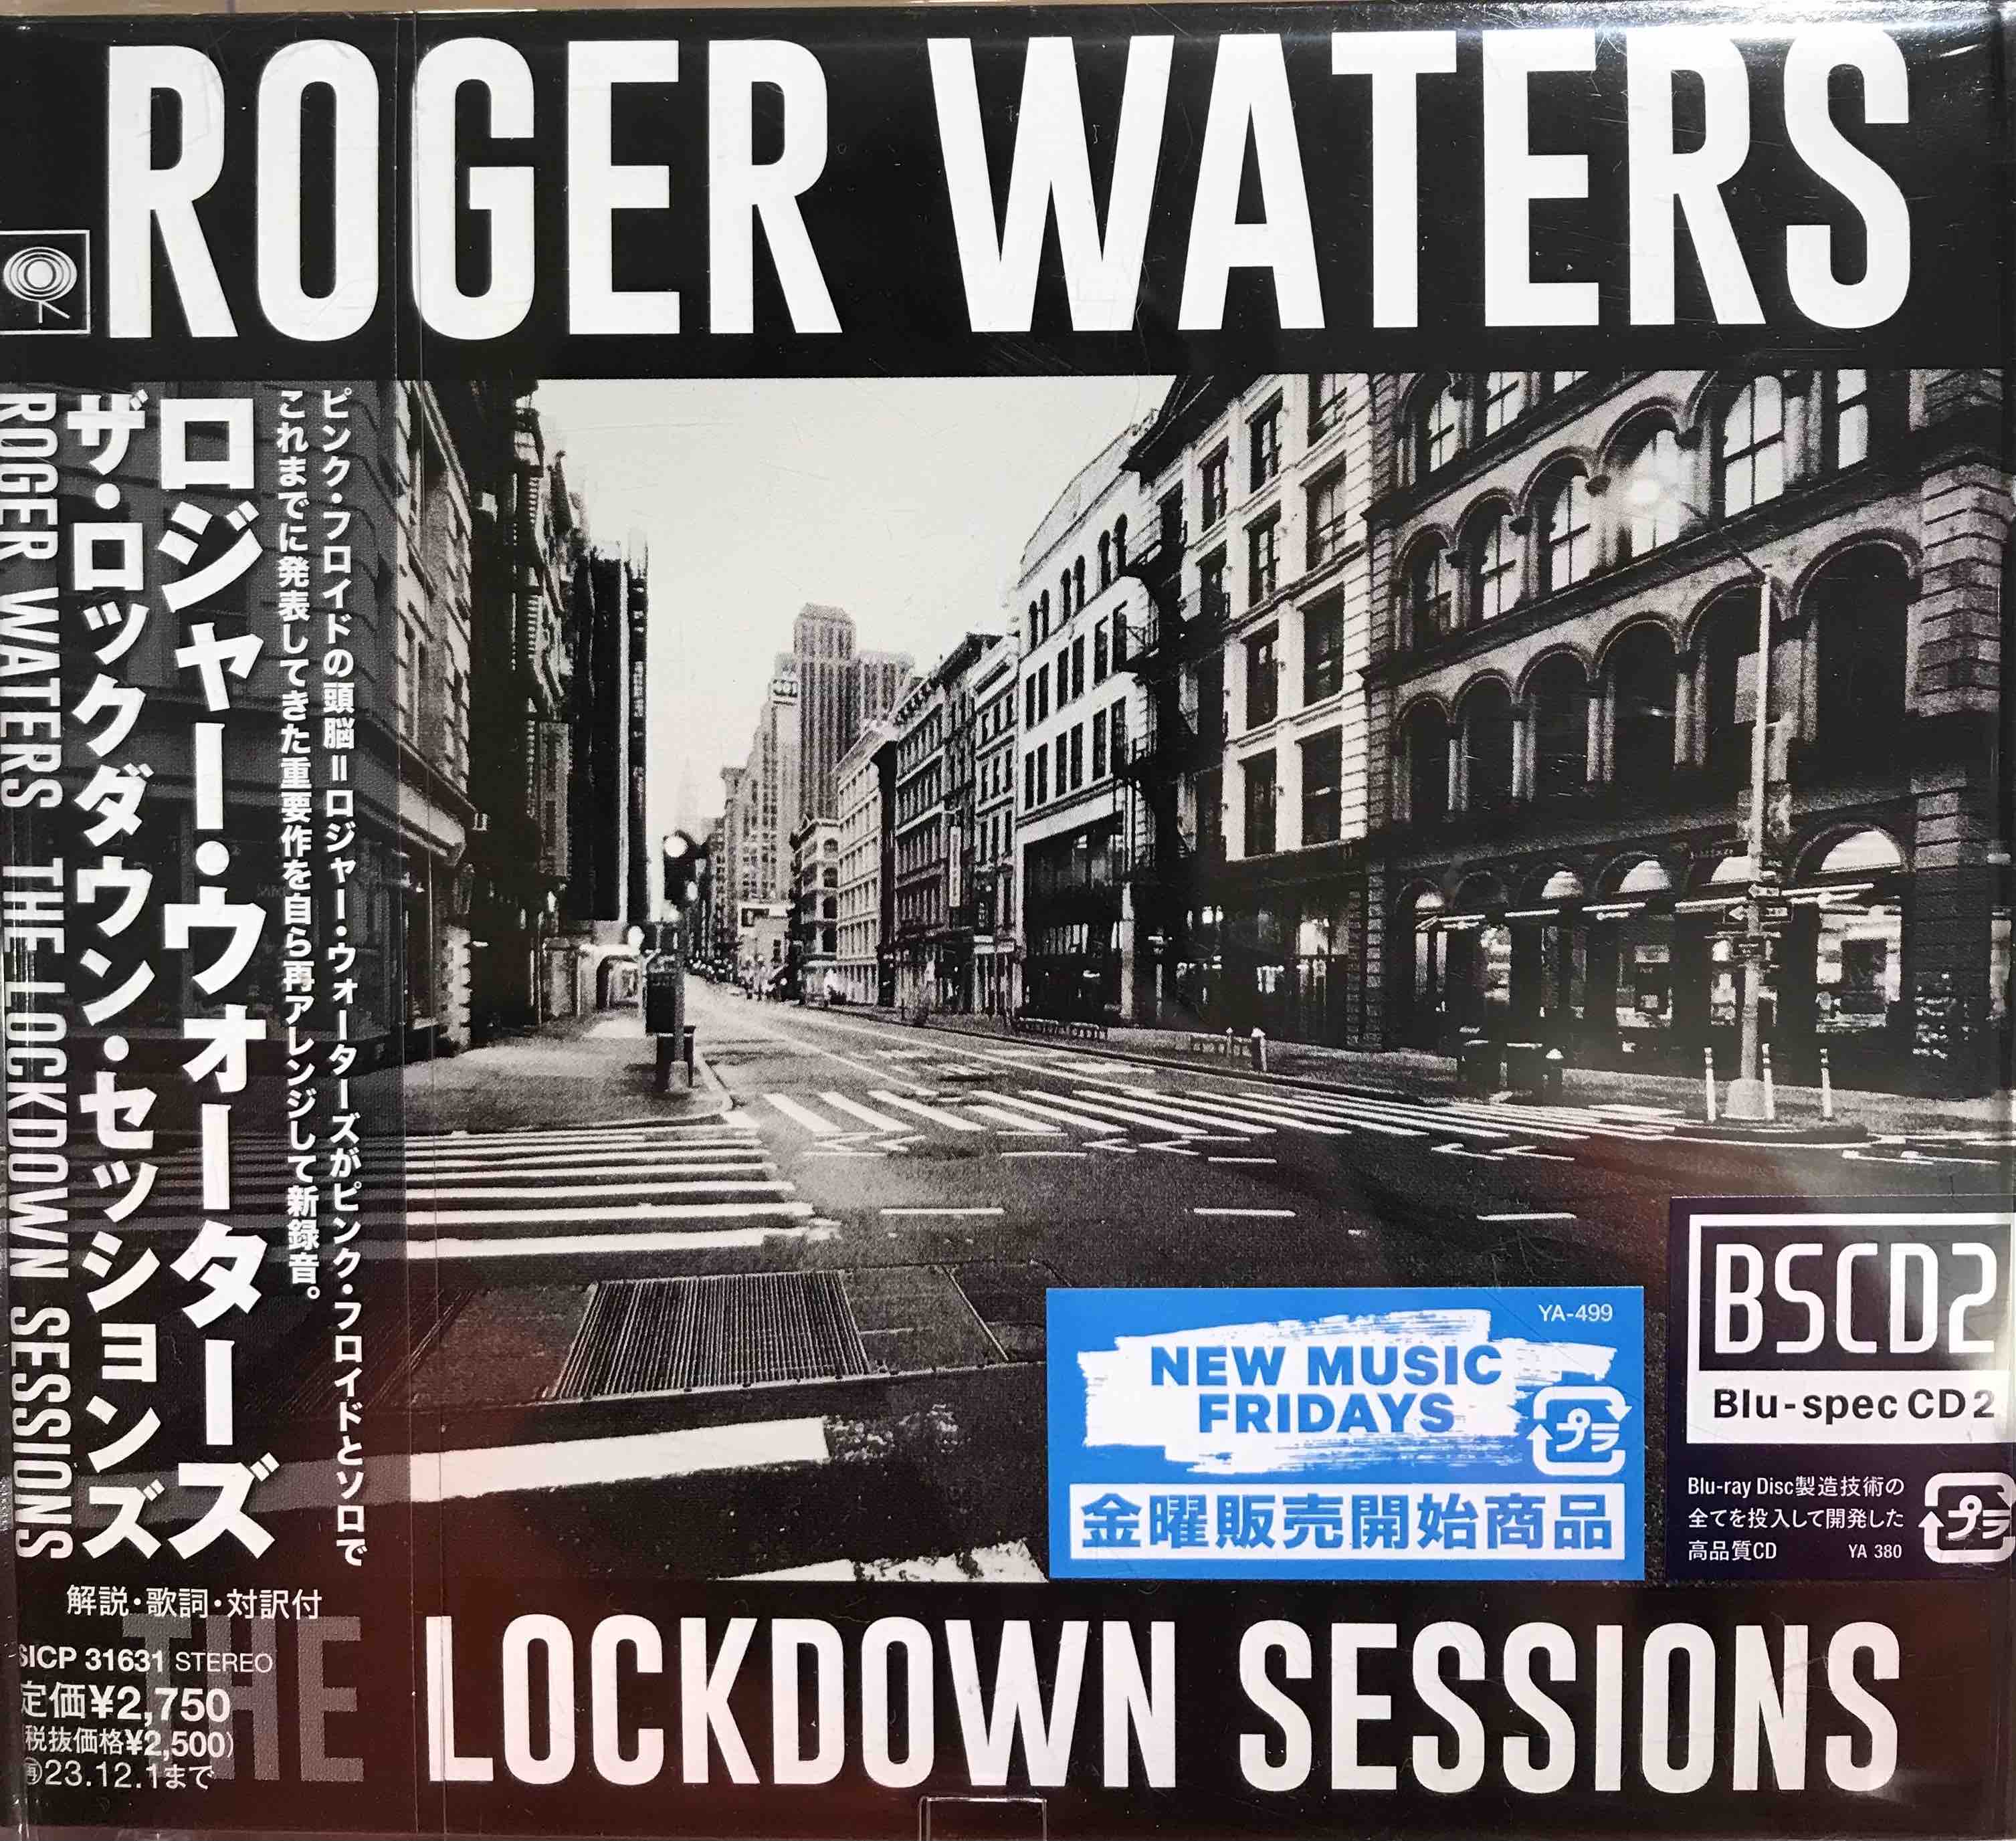 Roger Waters ‎– The Lockdown Sessions